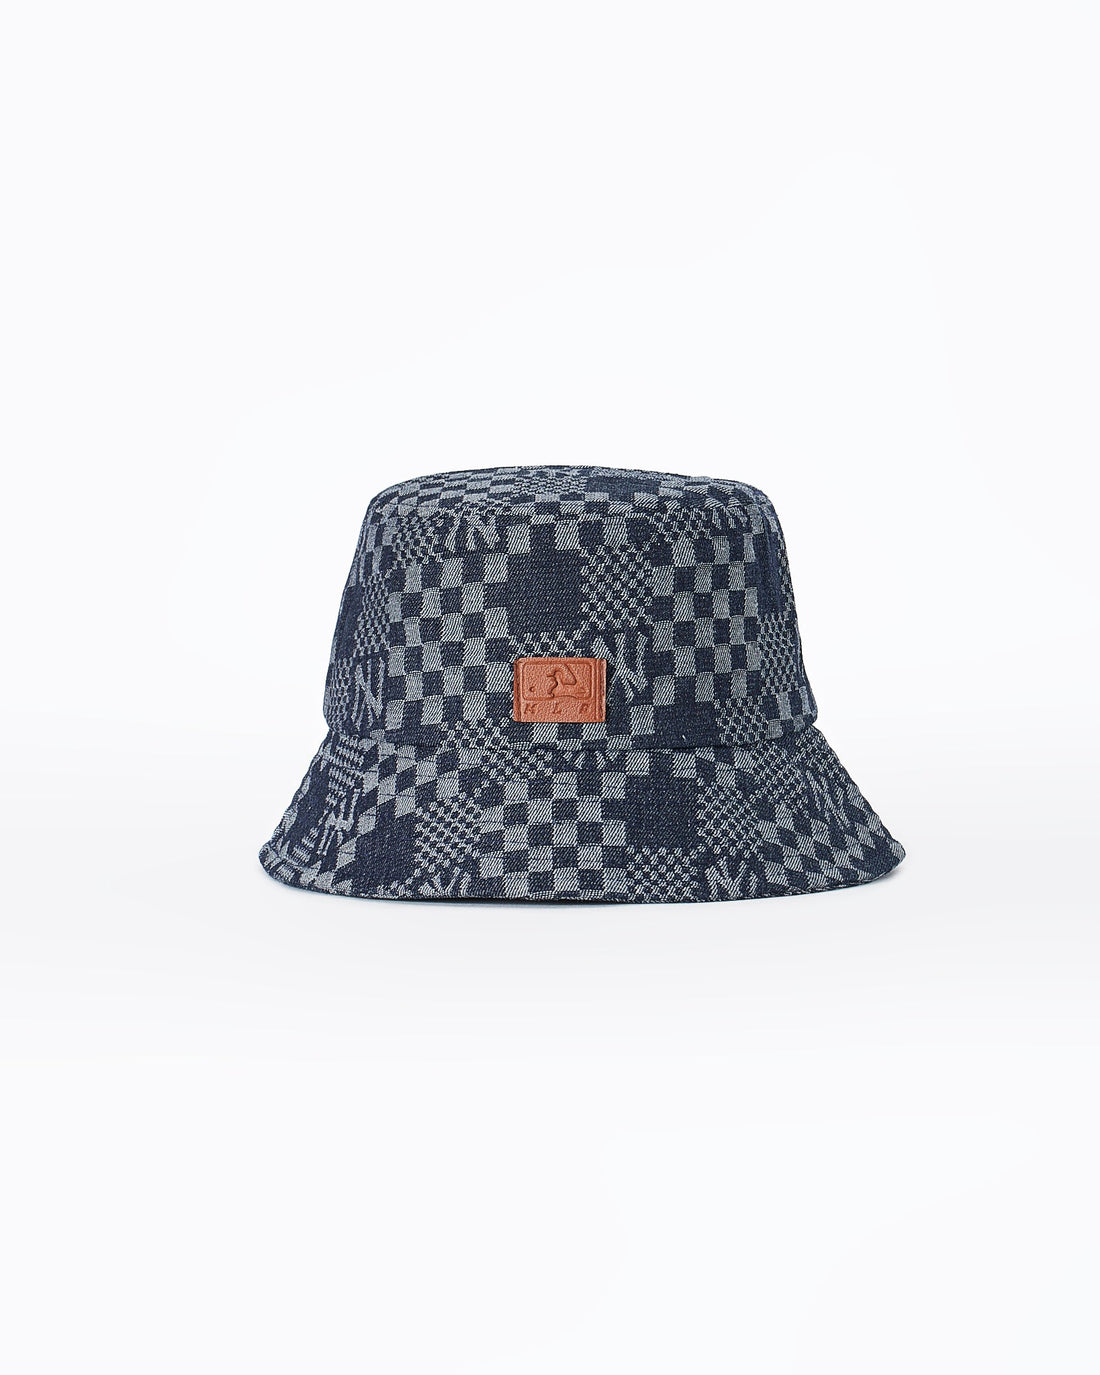 Monogram Printed Hat OUTFIT NY MOI Bucket 13.90 Over -